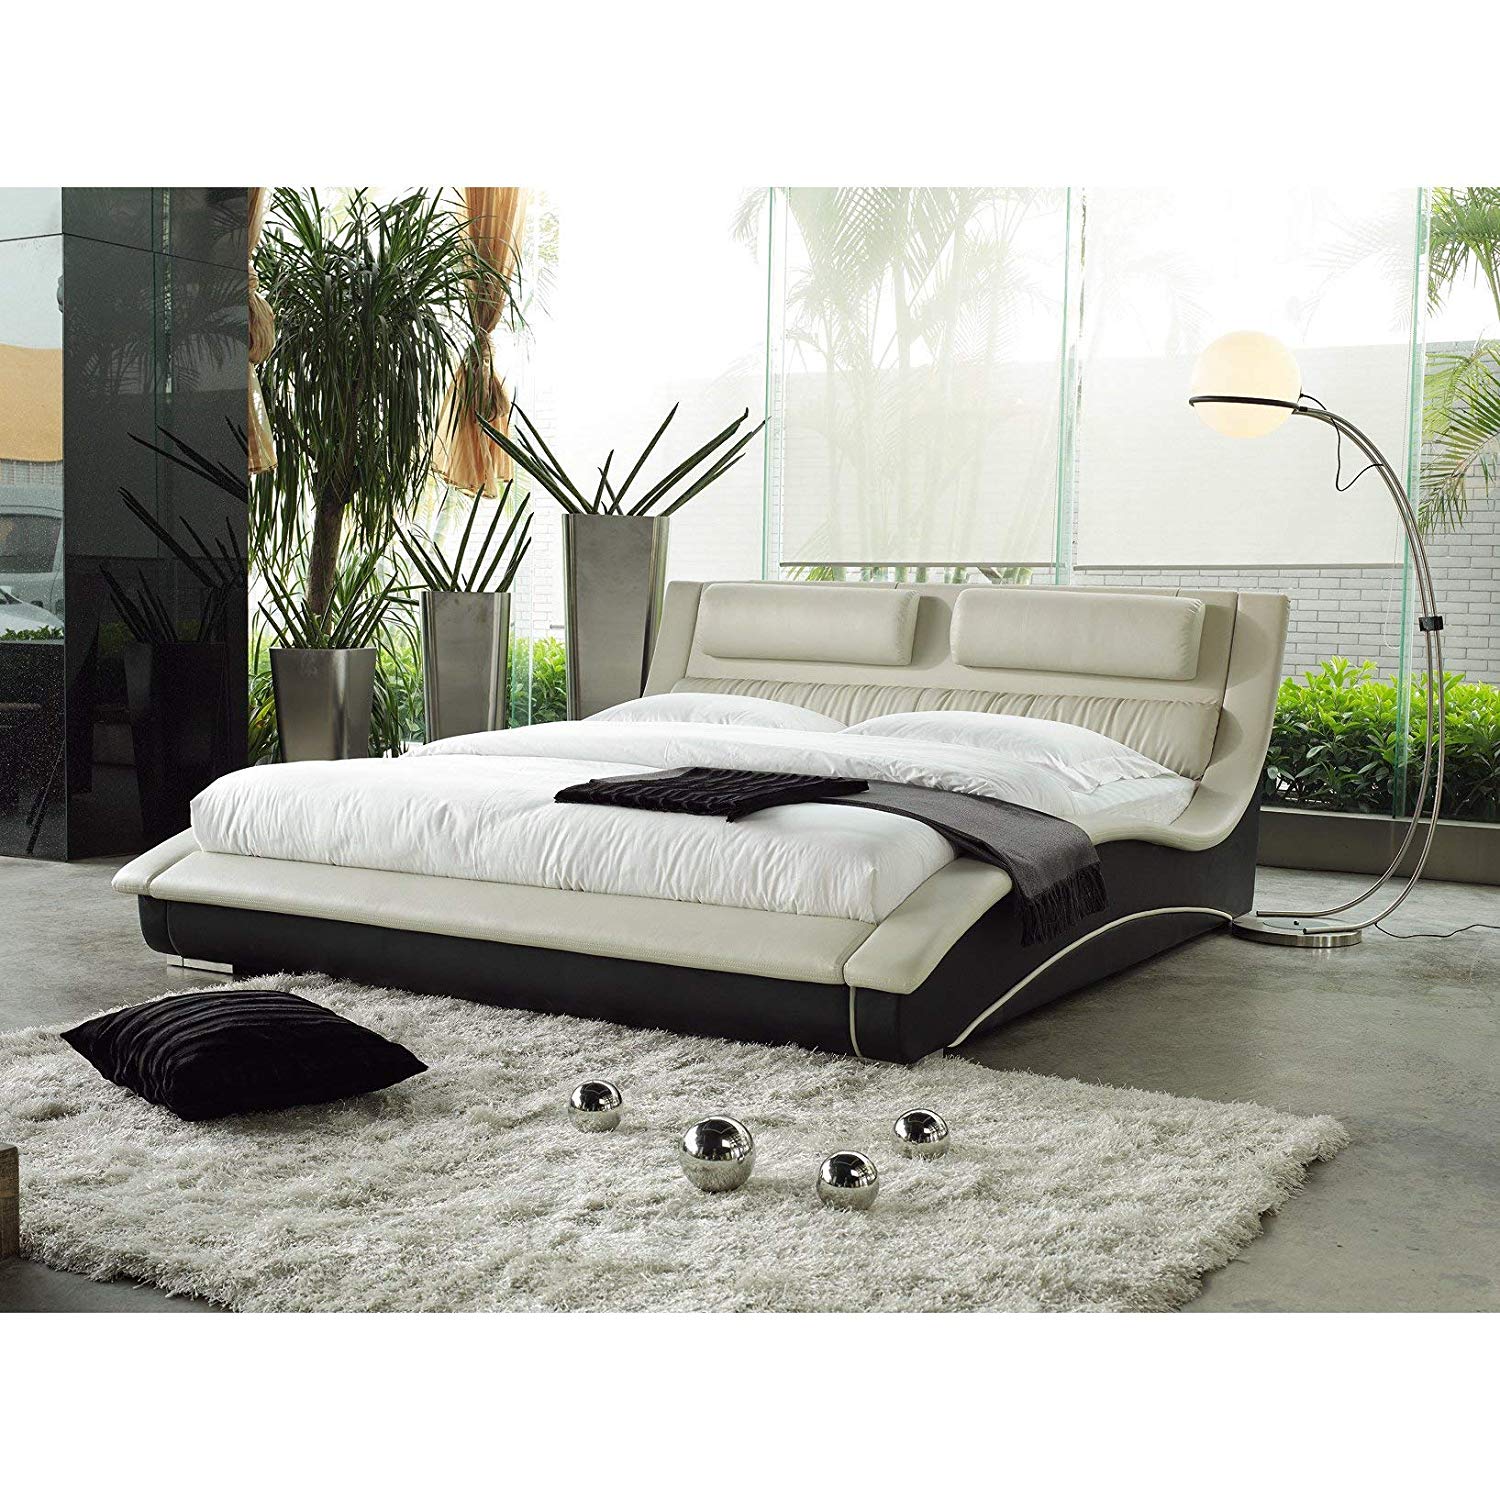 Japanese Platform Bed Frames: Practicality, Style and Pure Zen